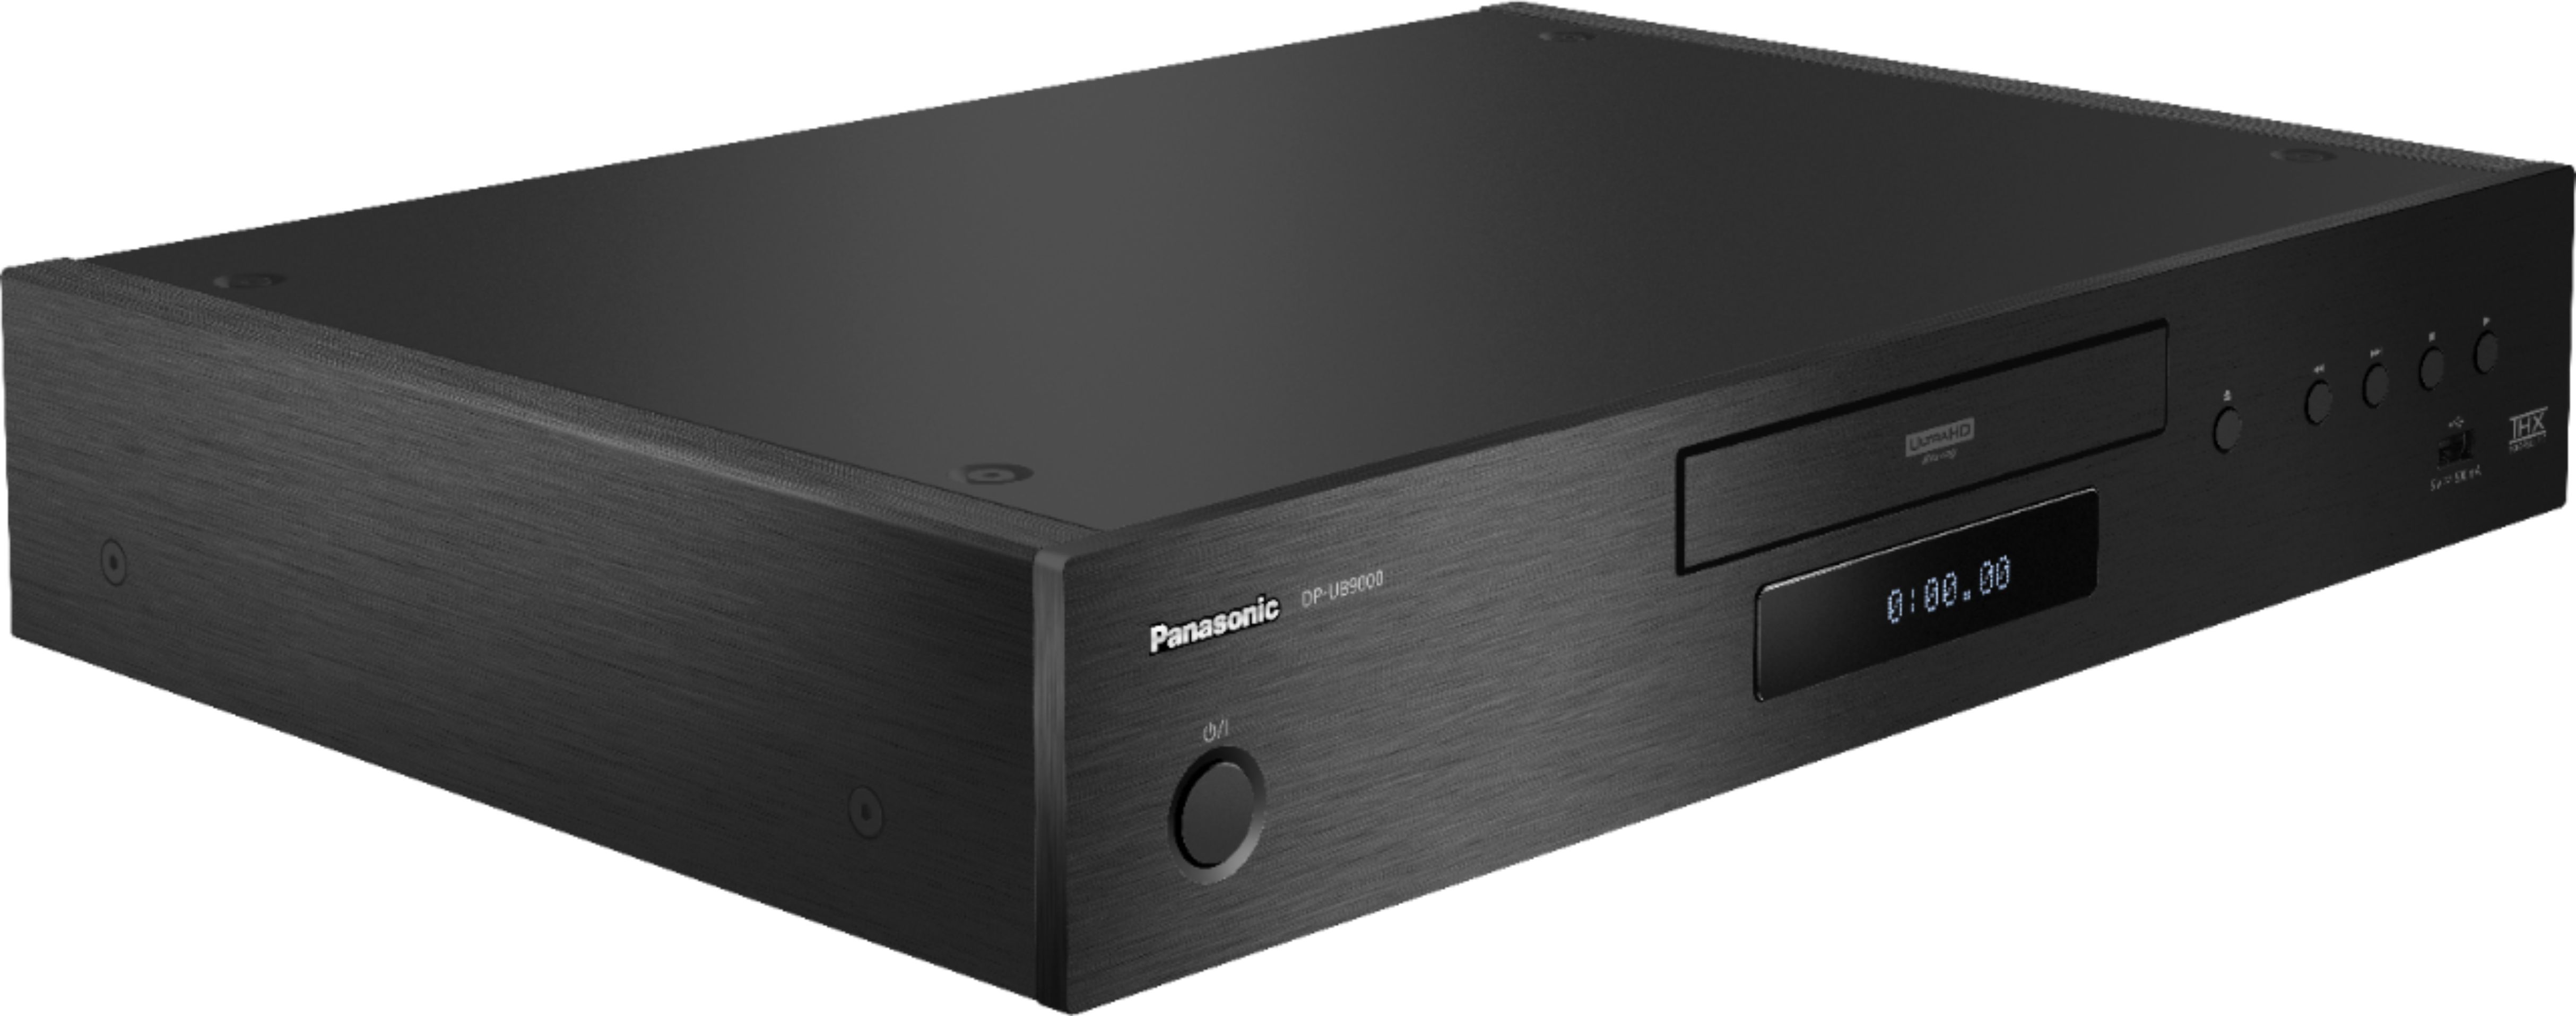 Angle View: Panasonic - Streaming 4K Ultra HD Hi-Res Audio with Dolby Vision THX Certified 7.1 Channel DVD/CD/3D Wi-Fi Built-In Blu-Ray Player - Black